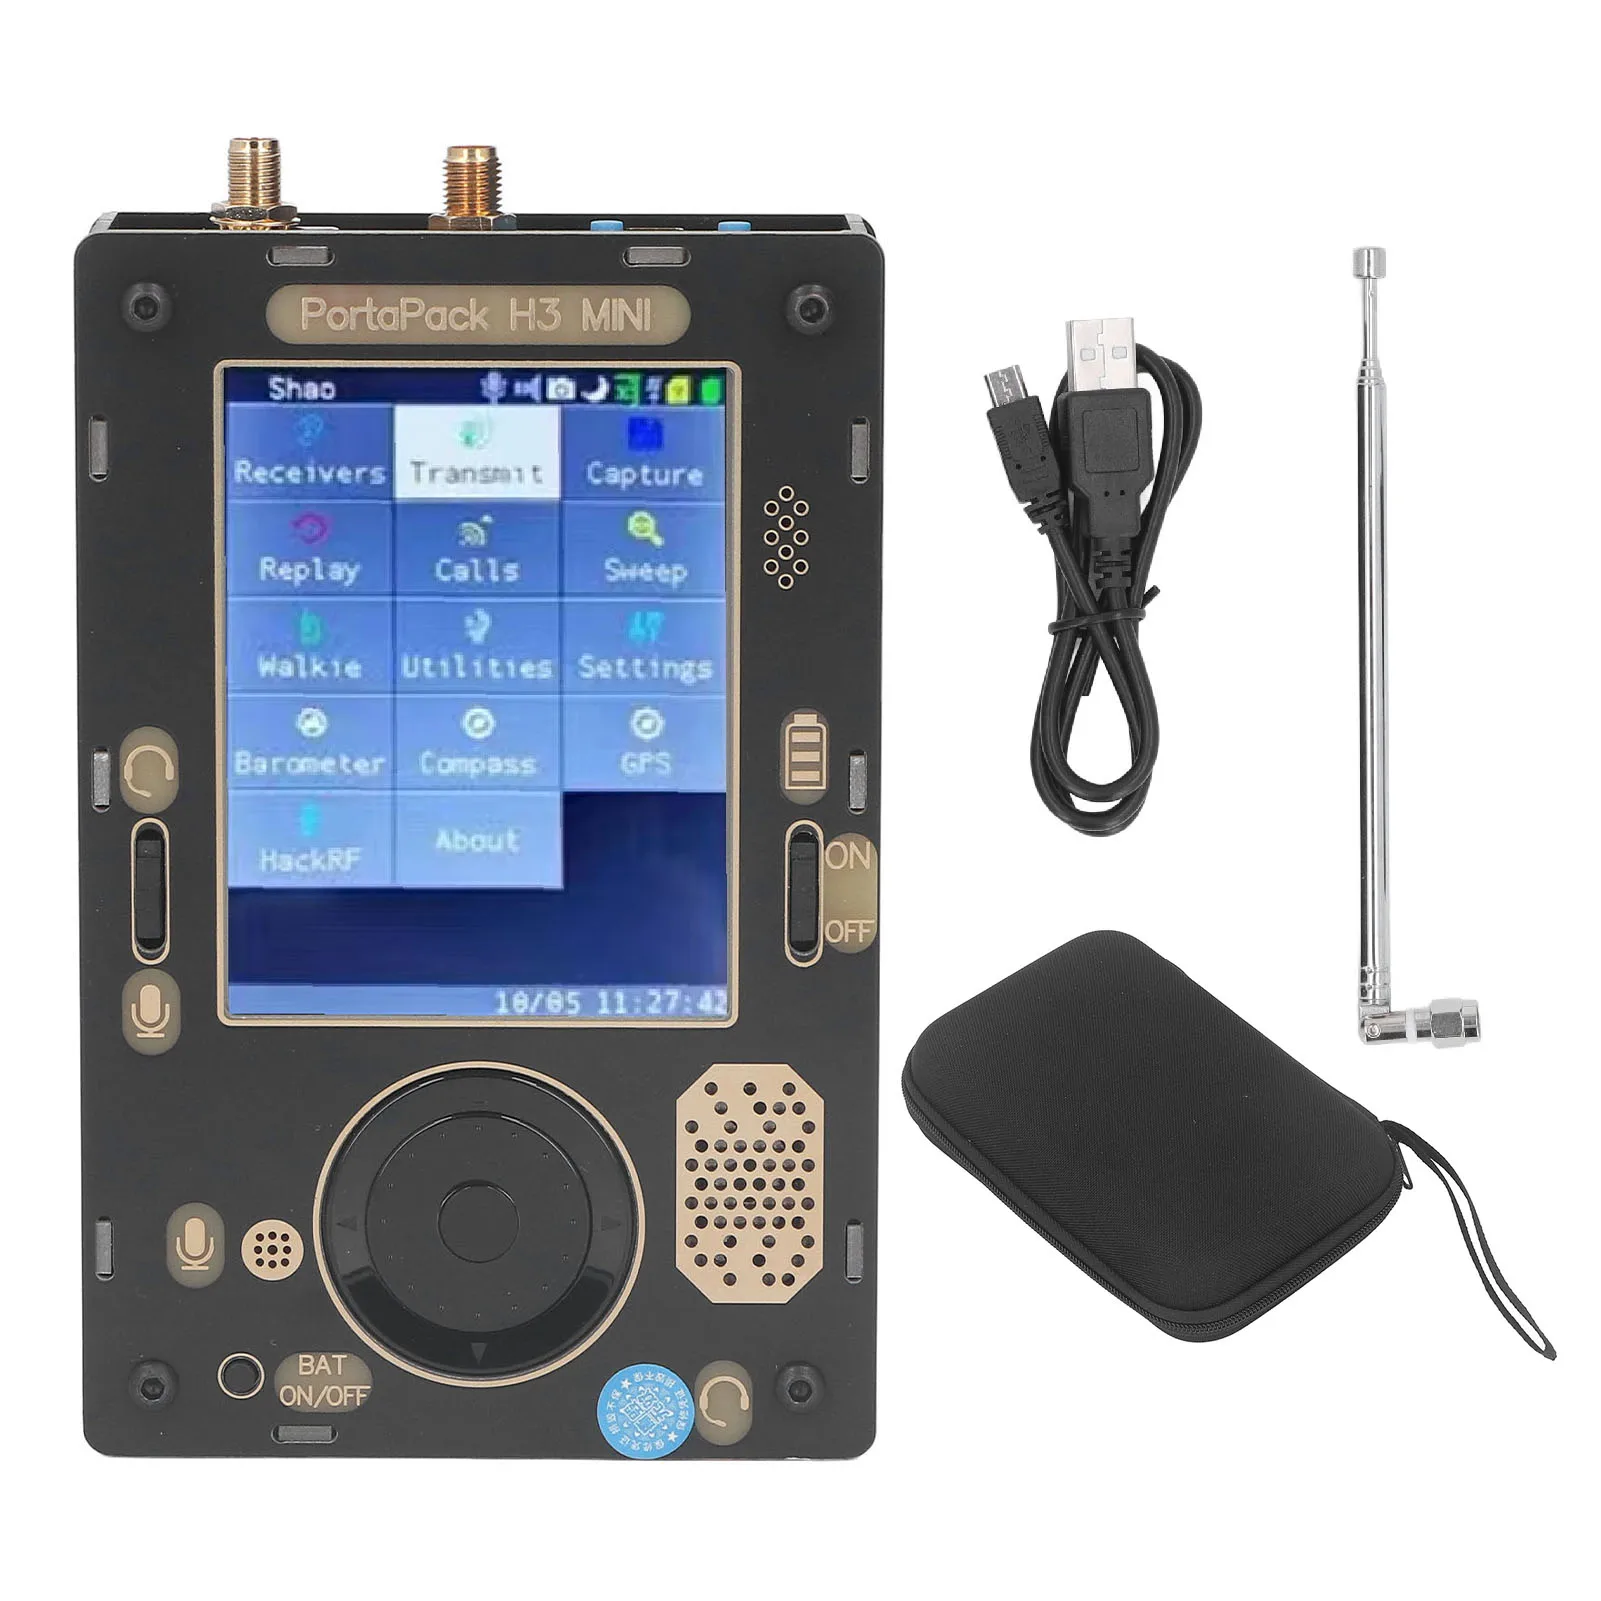 Portable Radio Transceiver 1MHz to 6GHz 3.2in TFT Touch Screen SDR  Transceiver with Microphone Barometer Compass GPS Receiver AliExpress